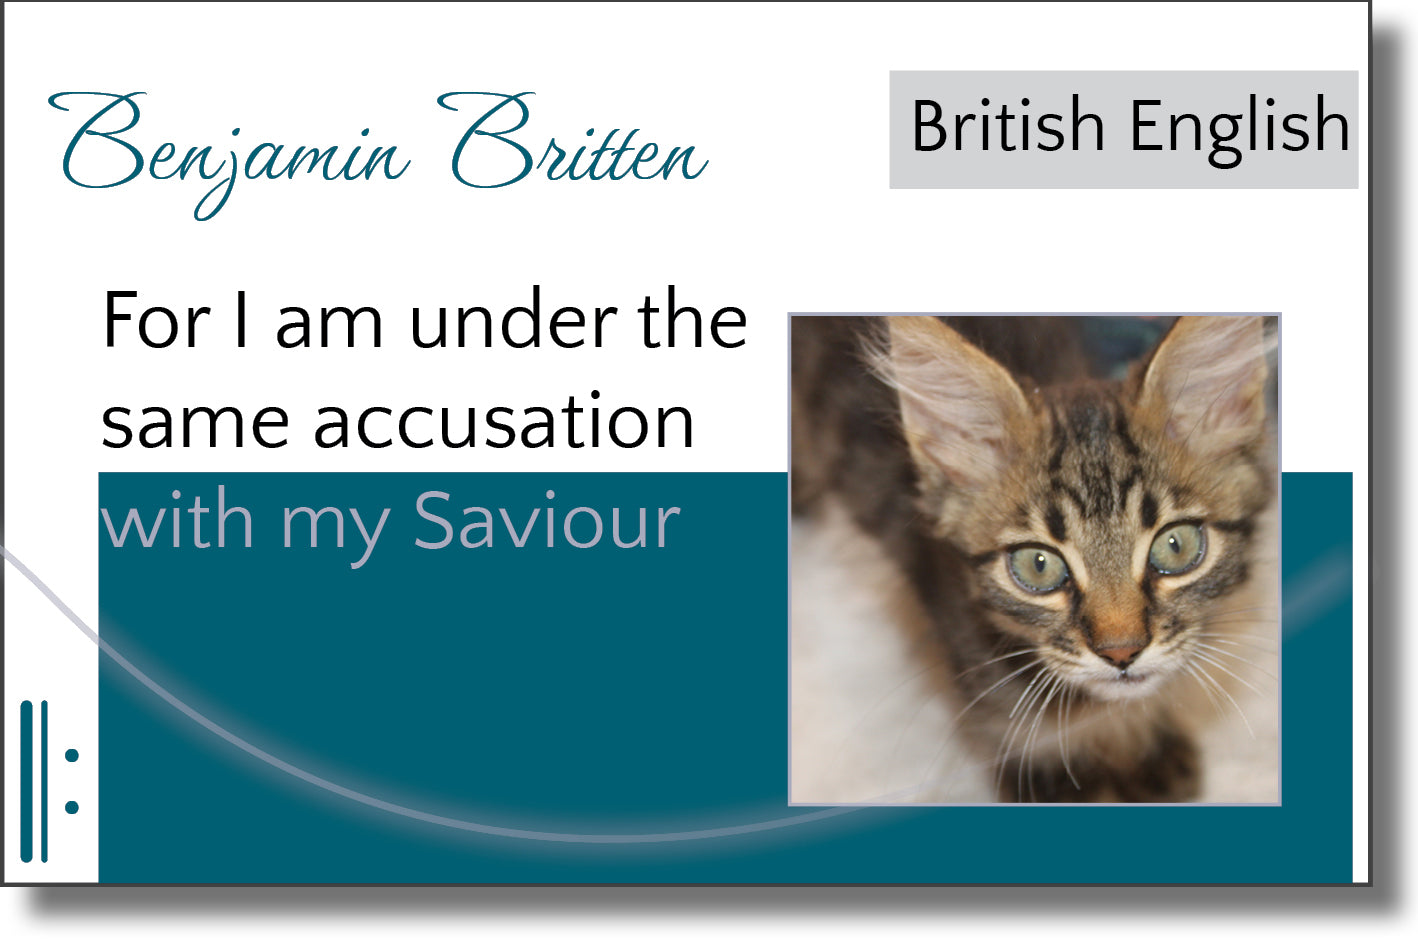 Britten - For I am under the same accusation with my Saviour